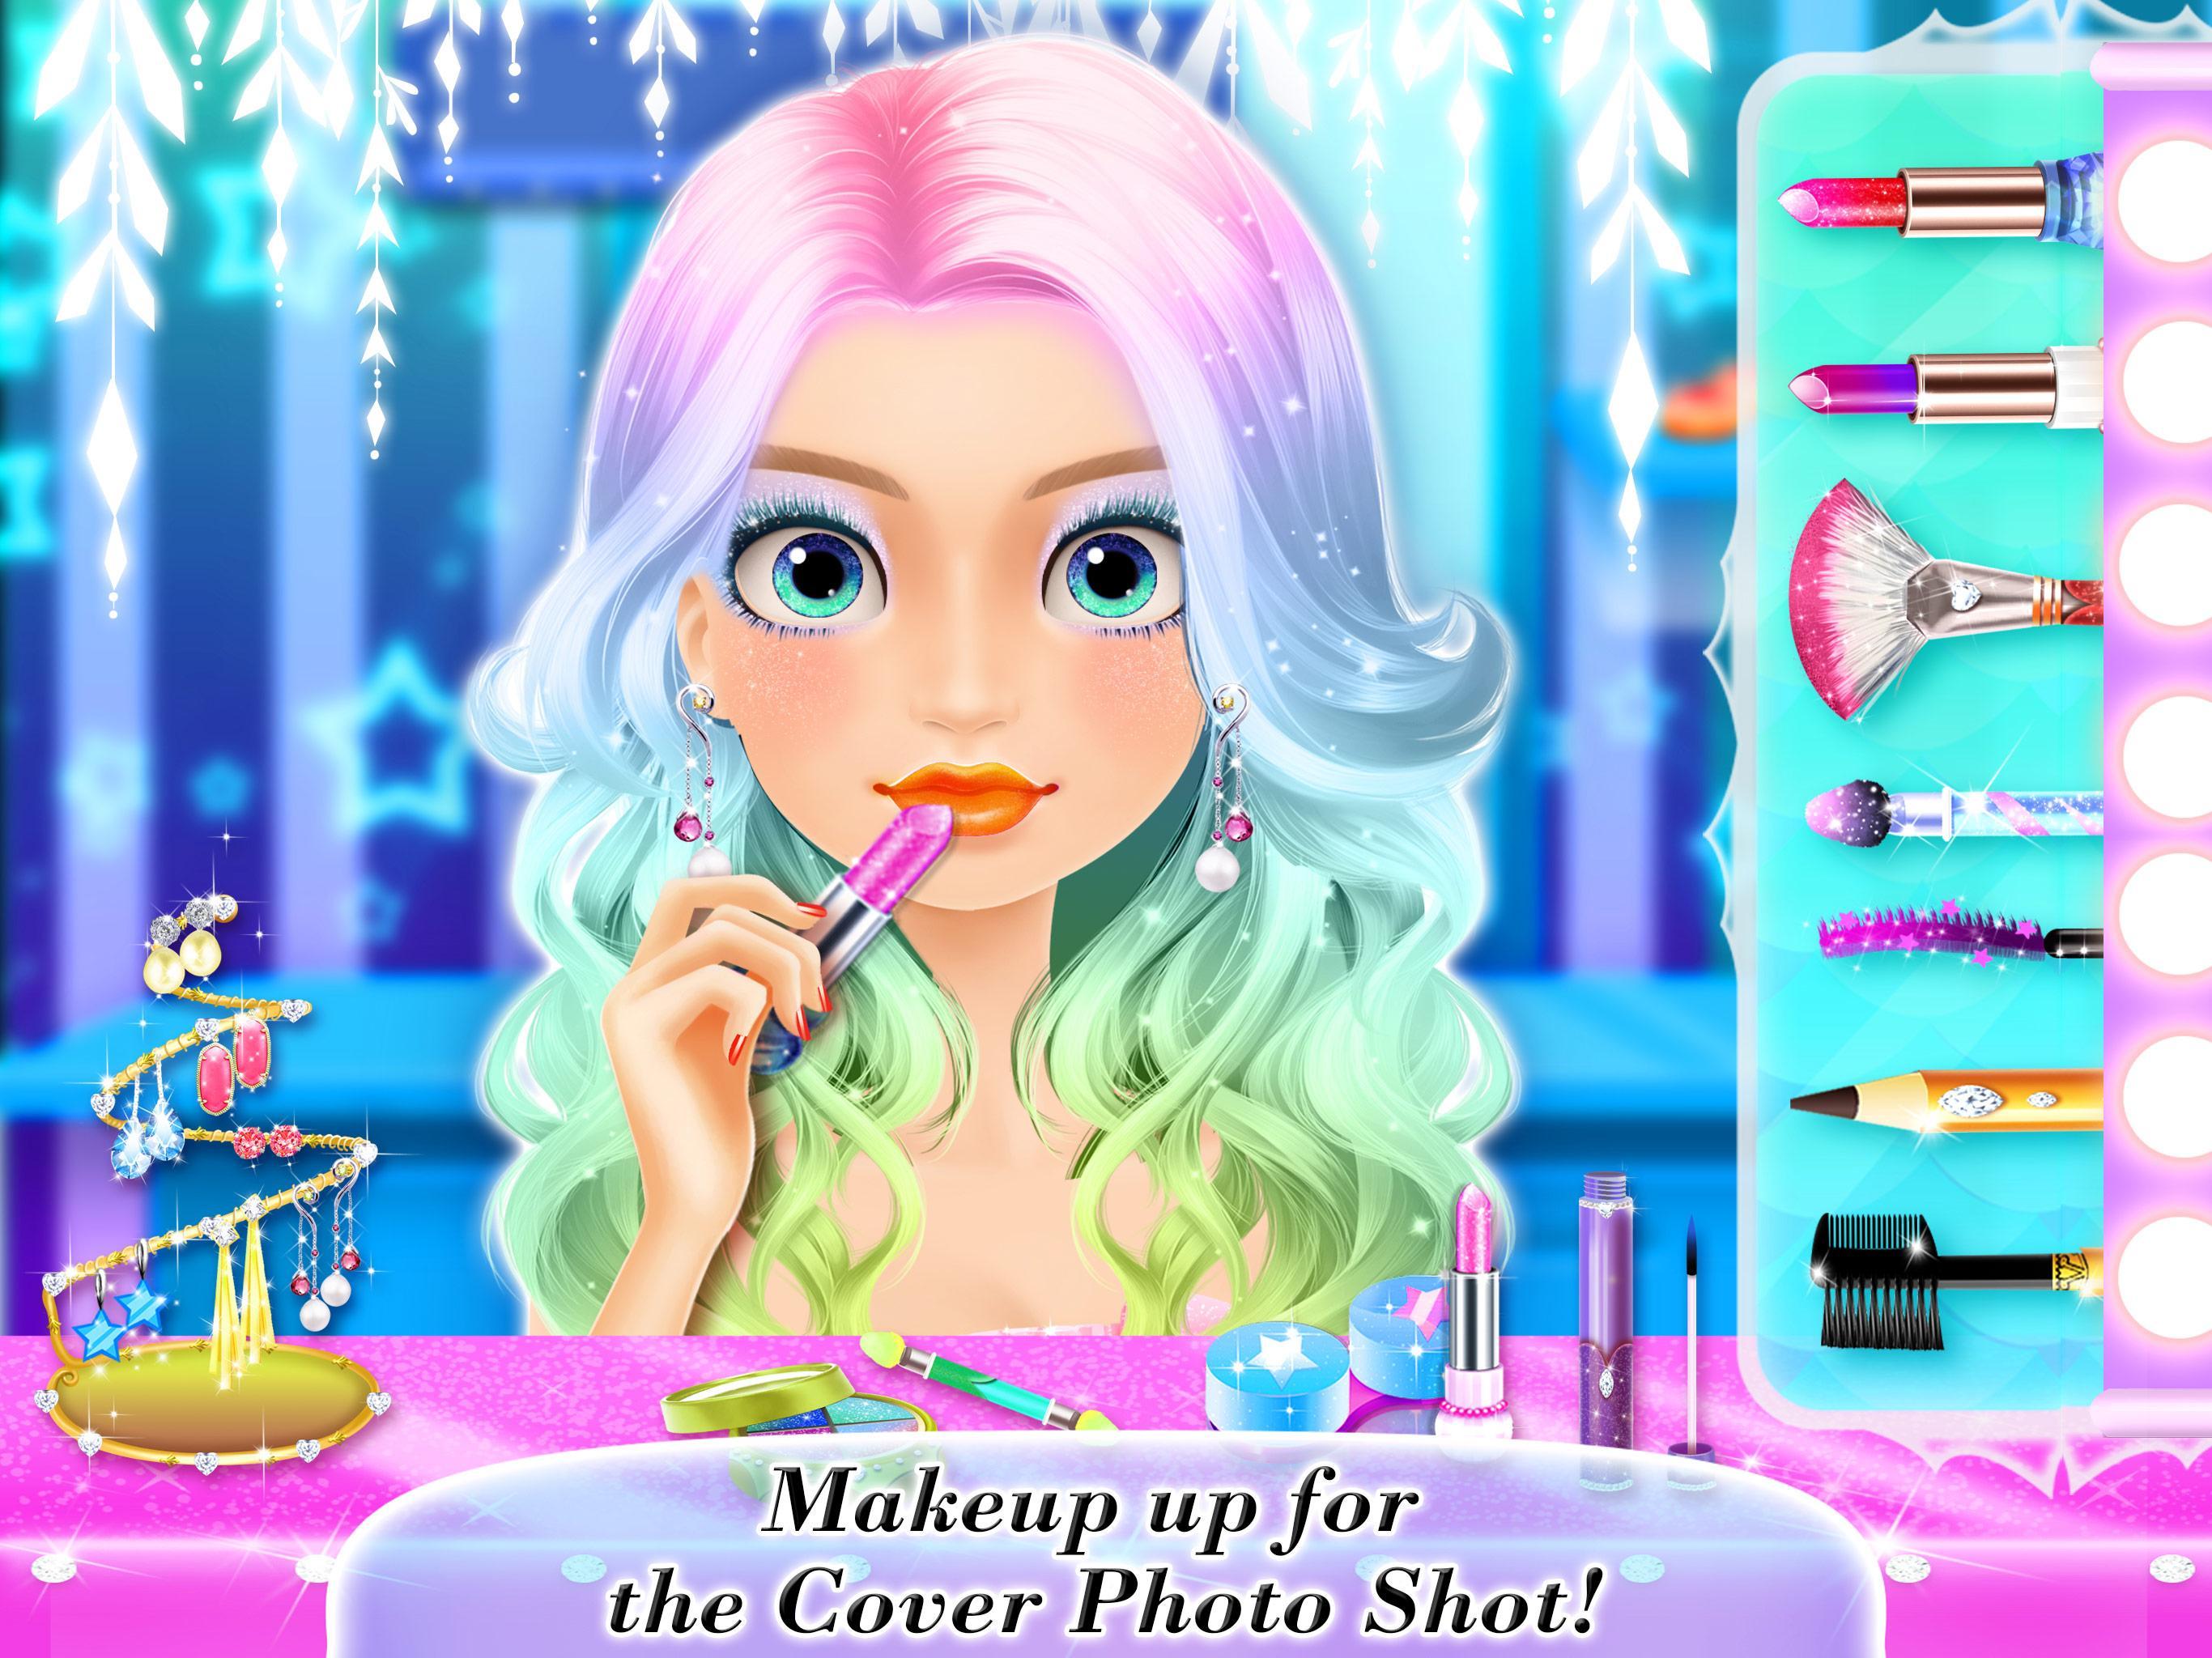 1. "Nail Art Fashion Salon Game" by Tapps Games - wide 2